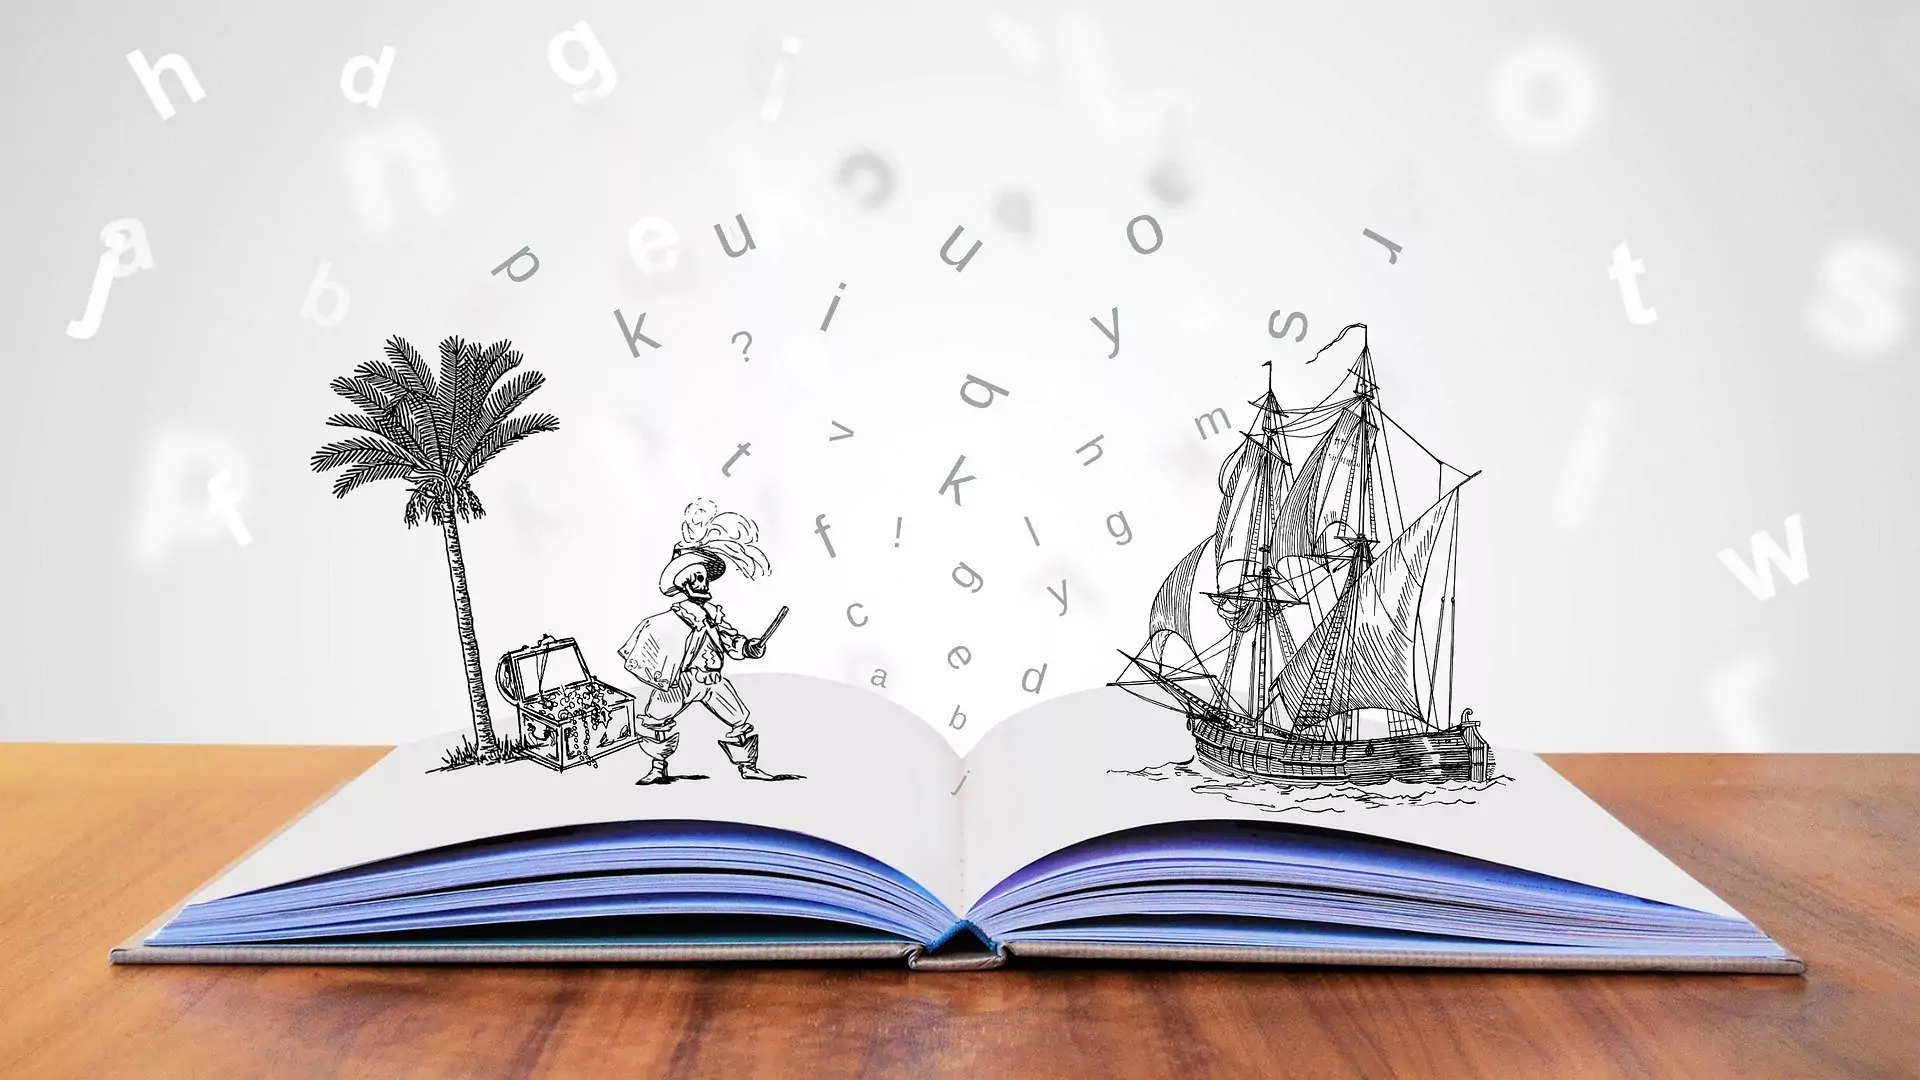 Storytelling Is A Recommended Approach to Make Connections with People's Emotions